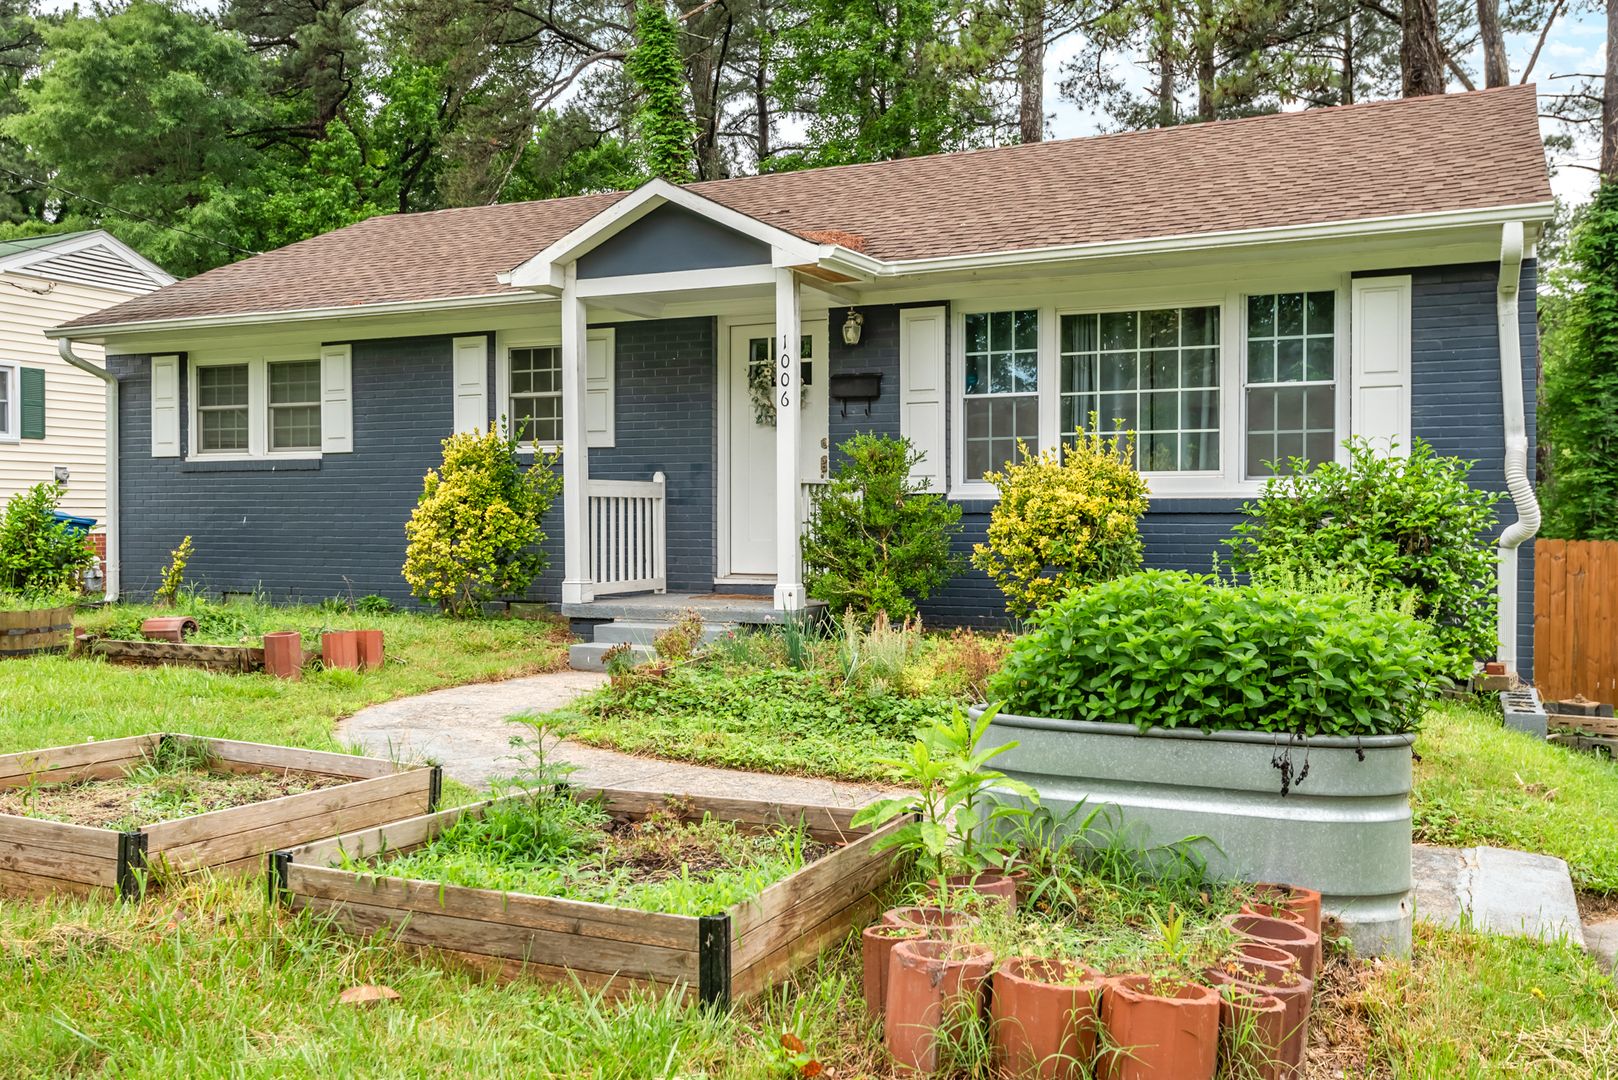 3 bedroom, 2 bathroom ranch-style home in Durham